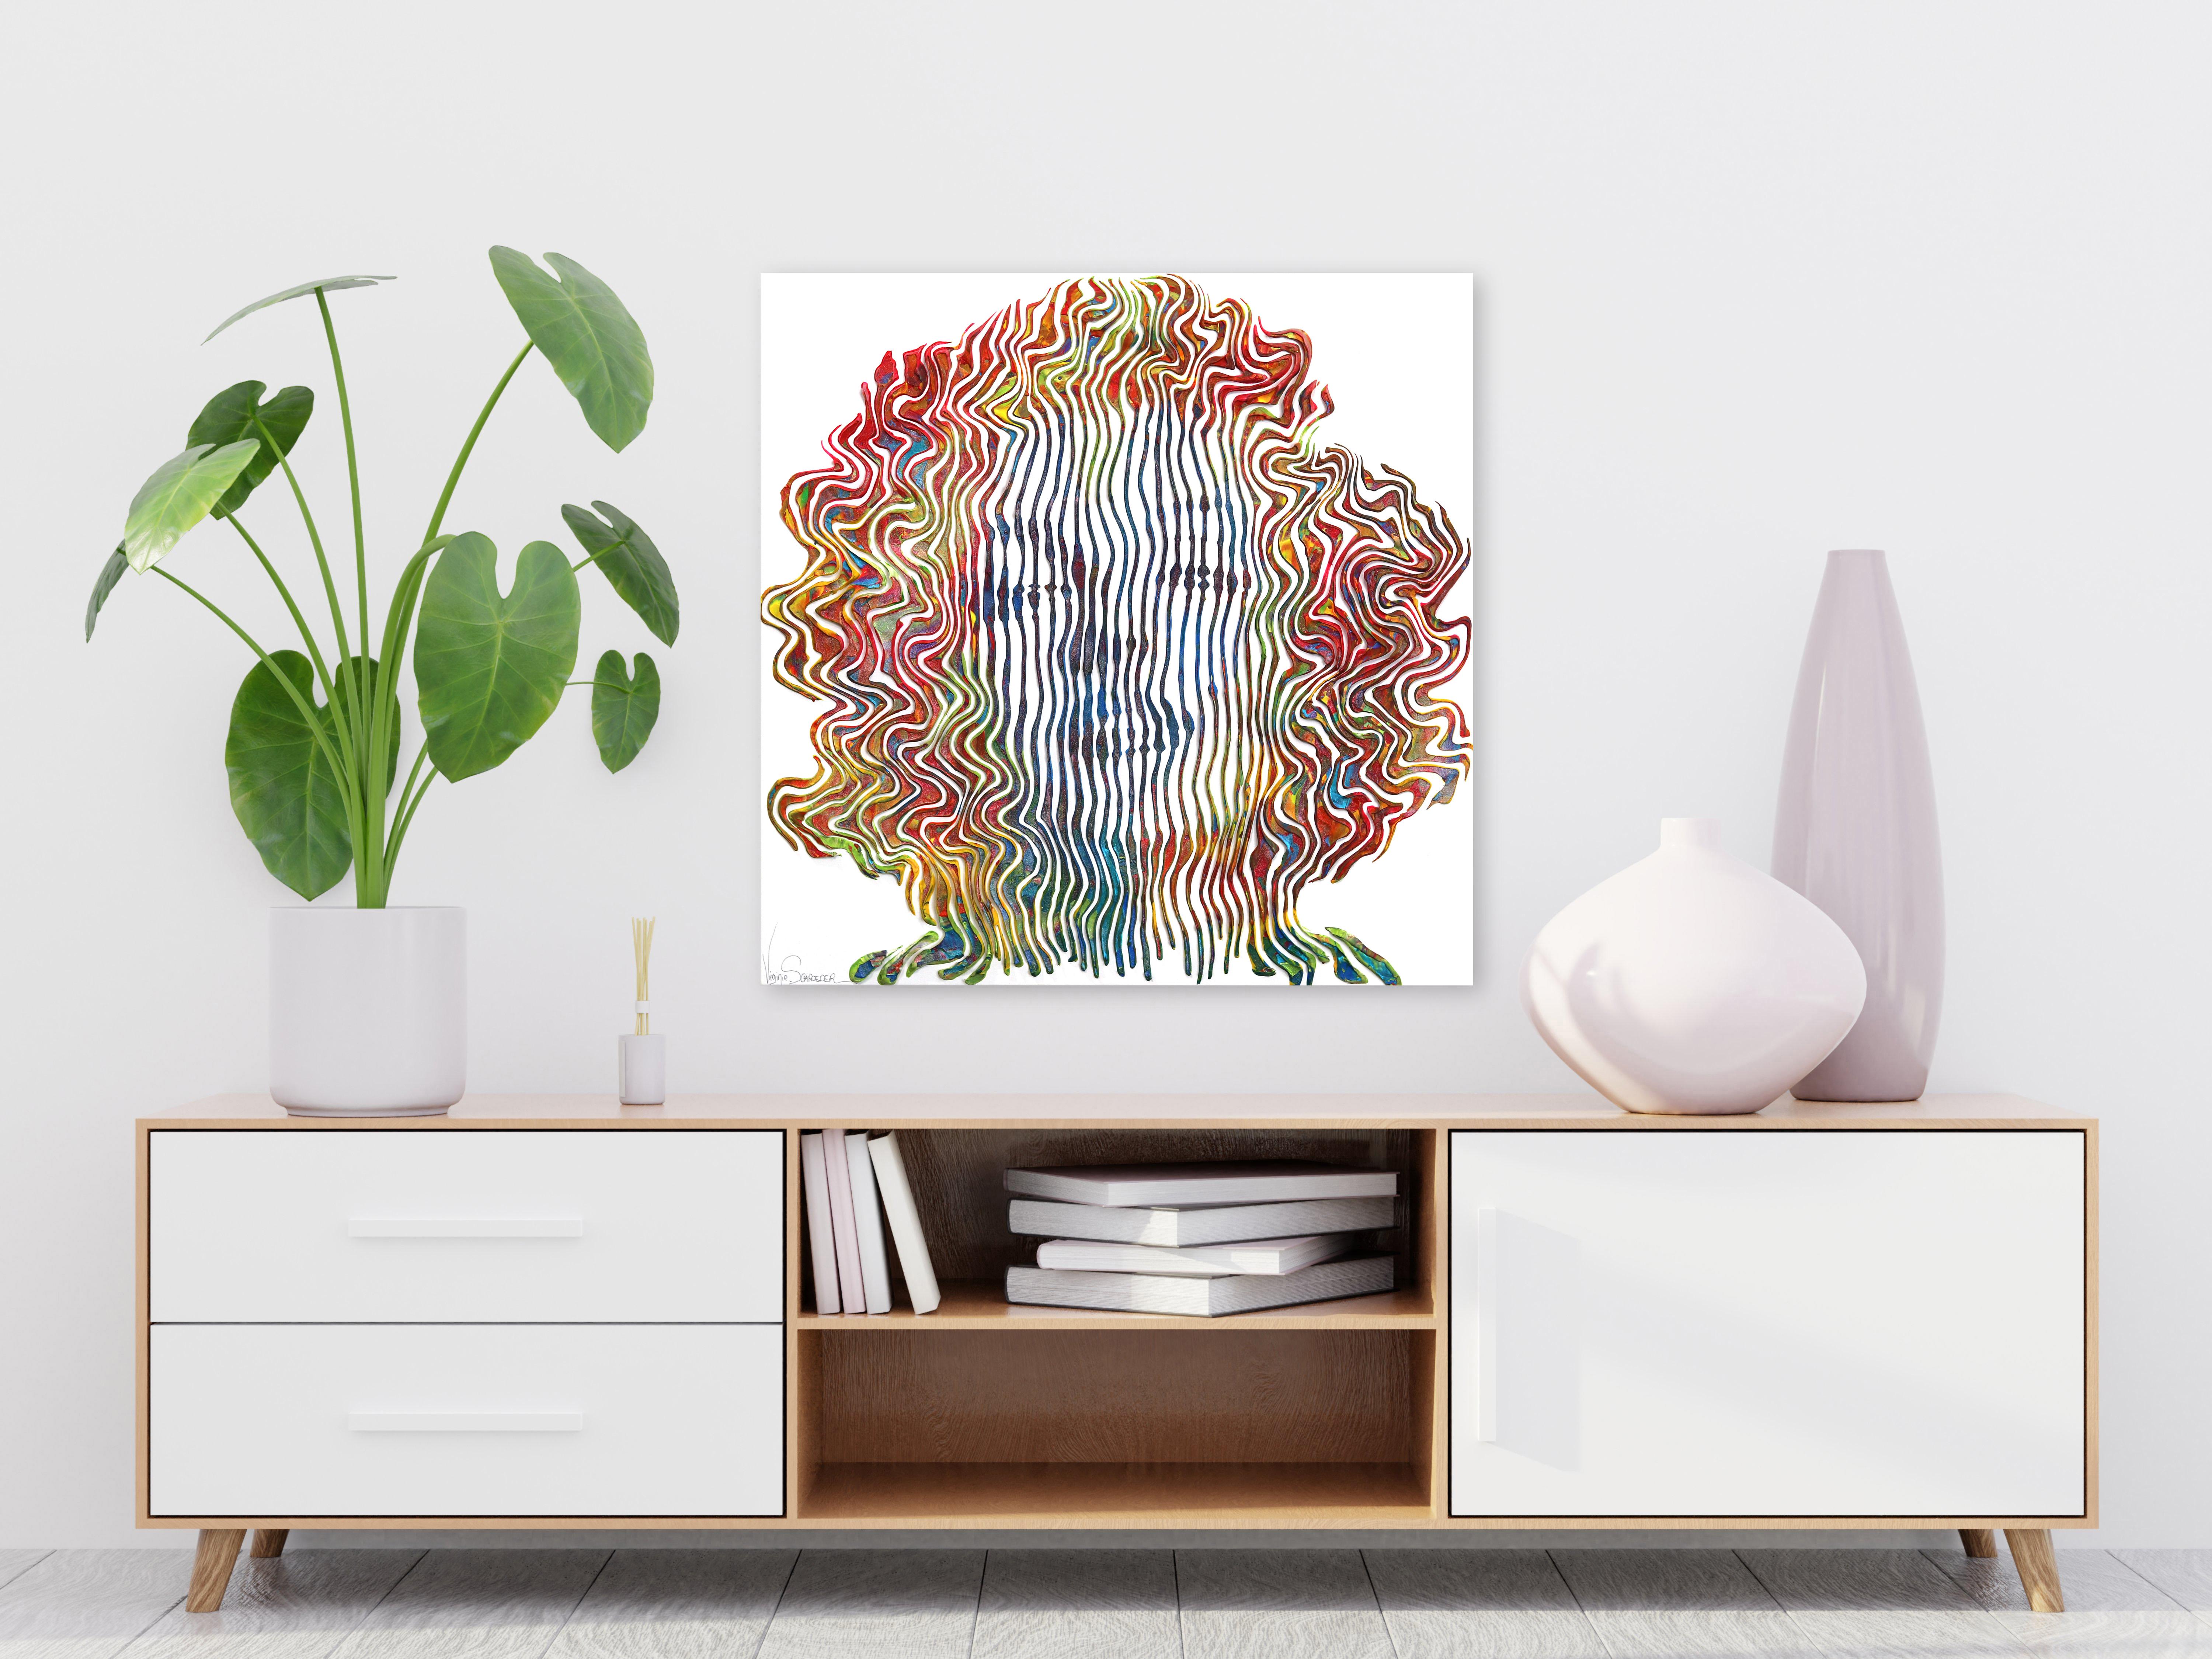 The Most Iconic Marilyn Monroe Forever - Painting by Virginie Schroeder